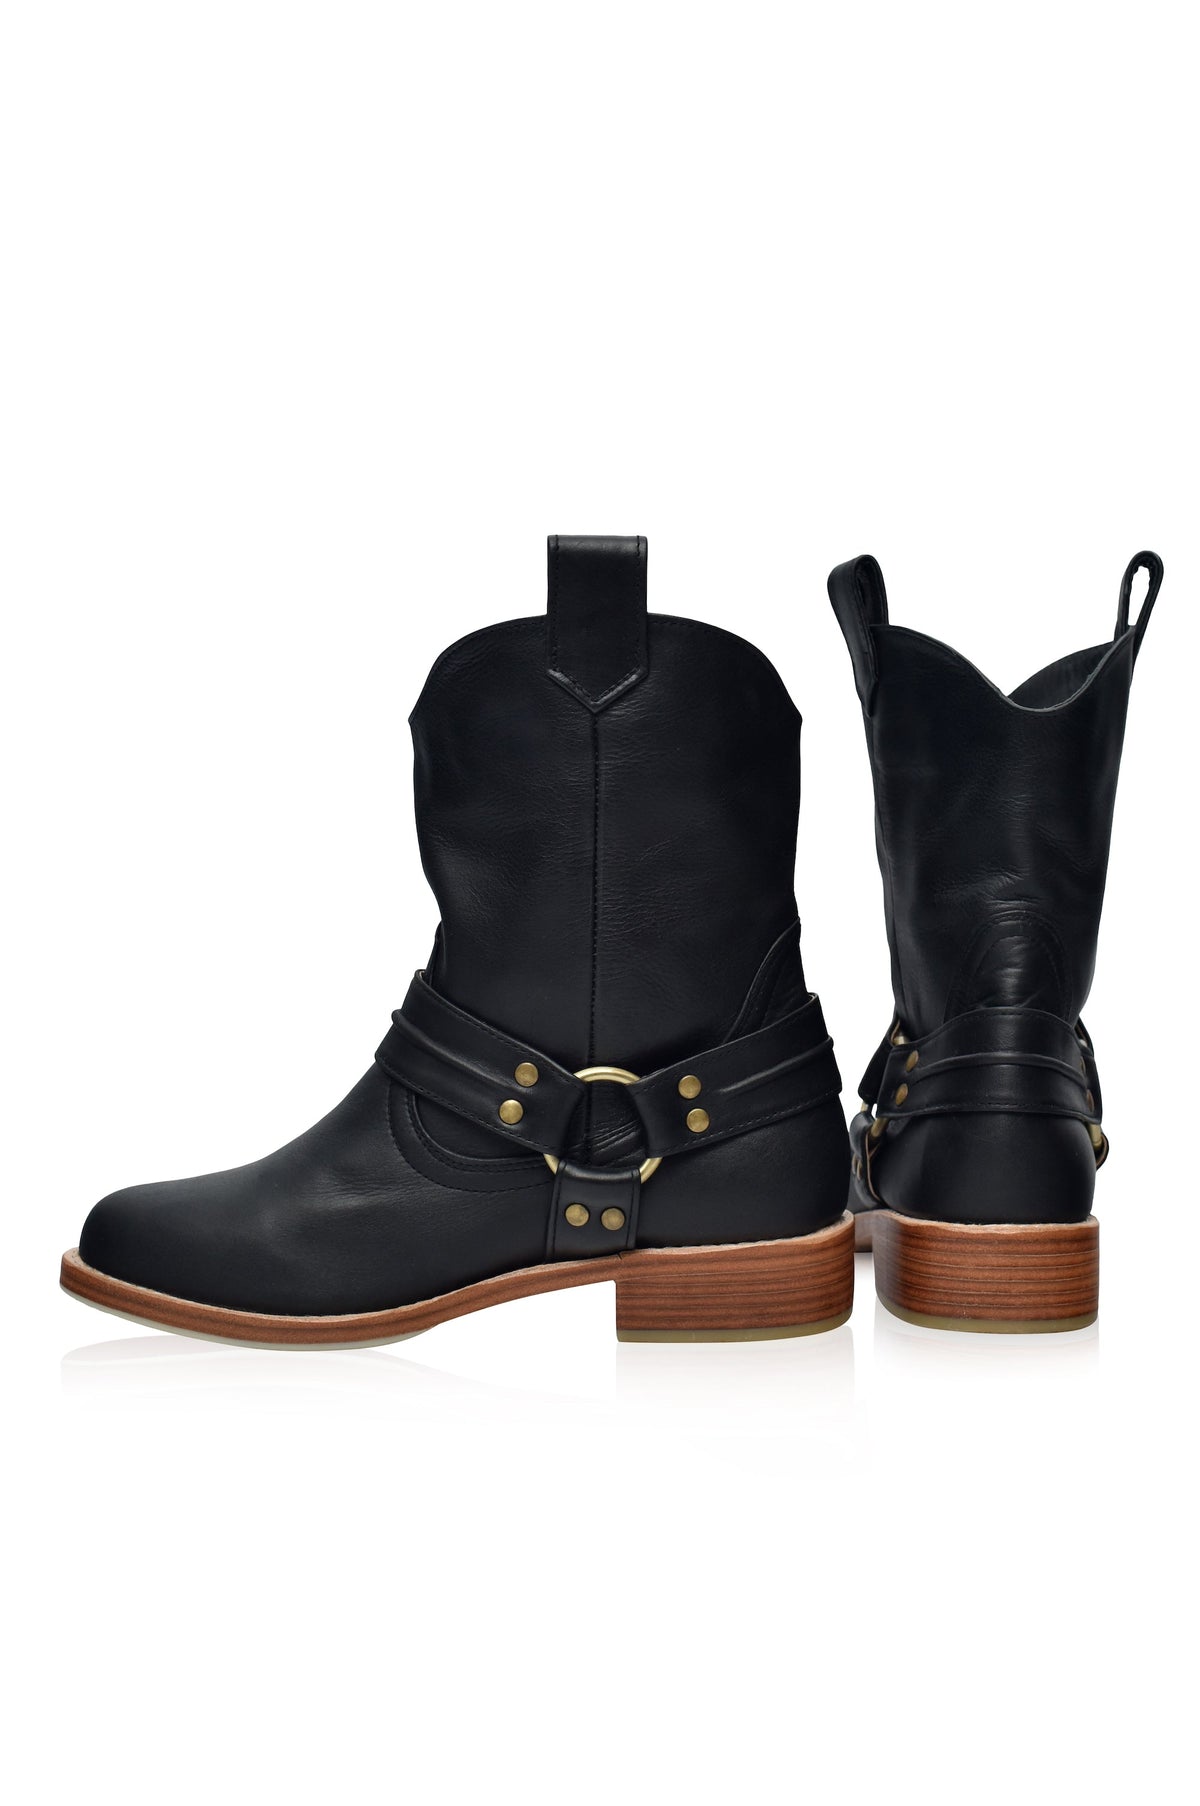 Cali Leather Boots by ELF